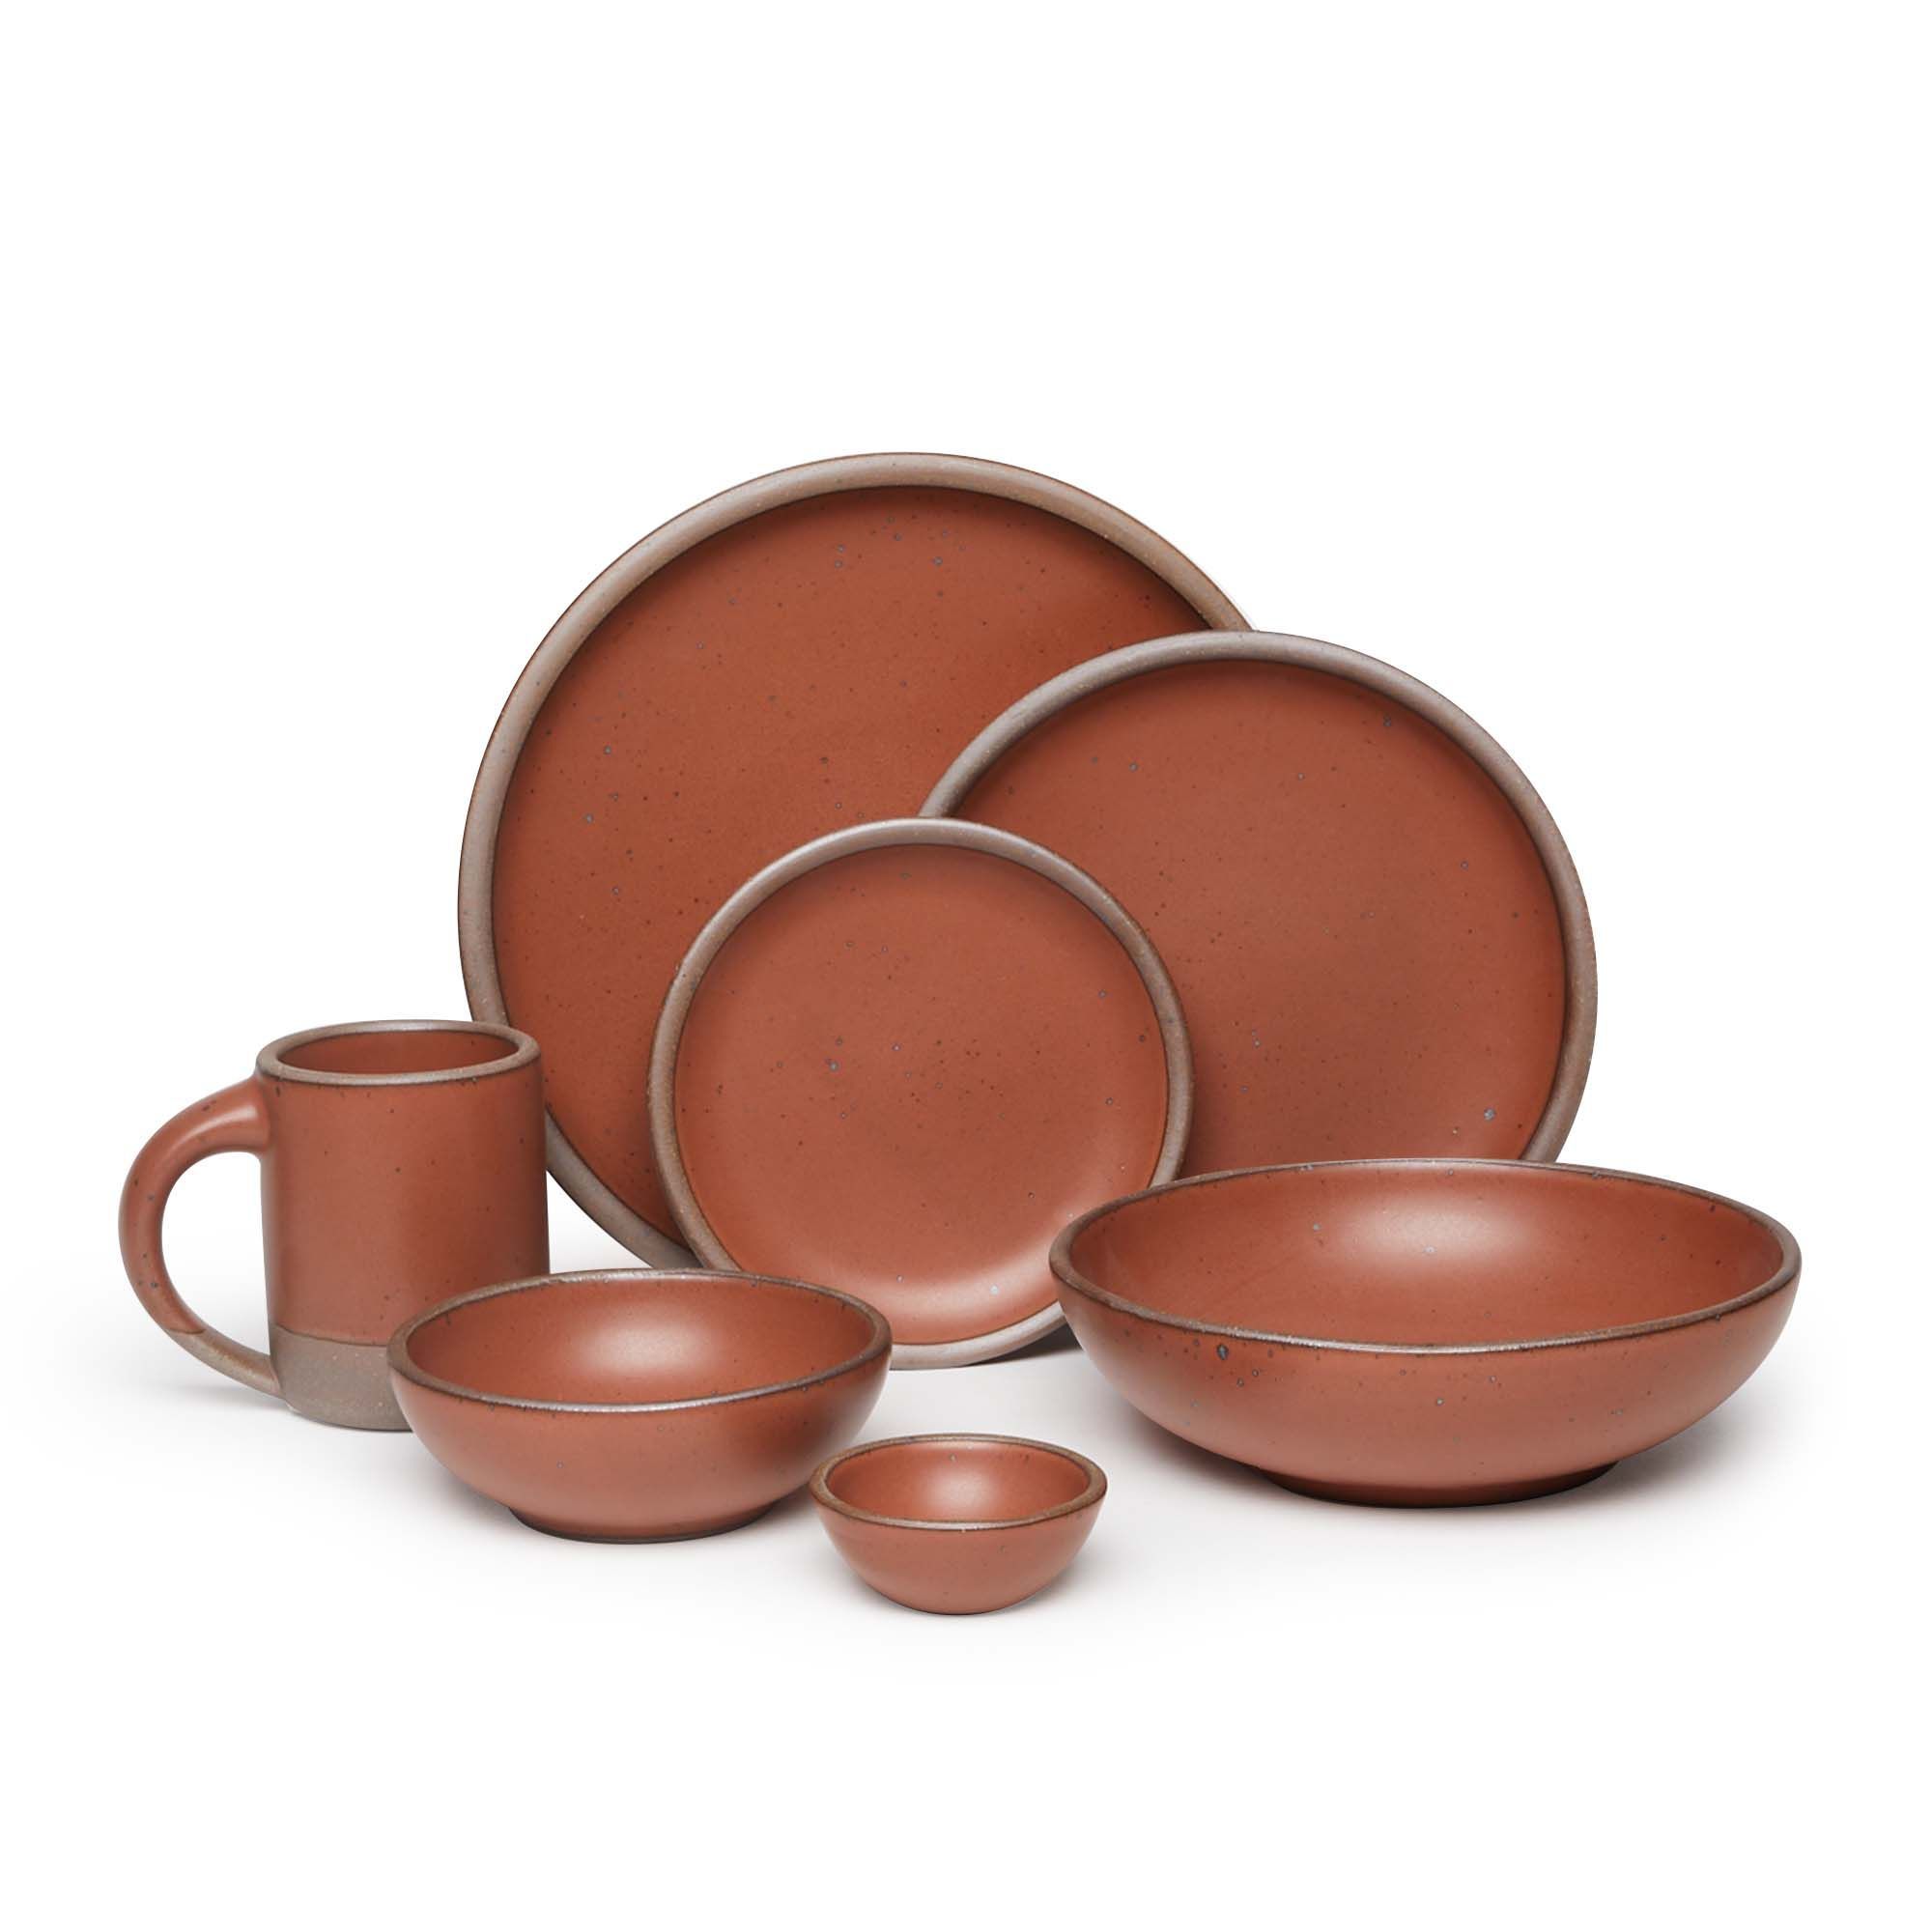 The Mug, bitty bowl, breakfast bowl, everyday bowl, cake plate, side plate and dinner plate paired together in a cool burnt terracotta color featuring iron speckles